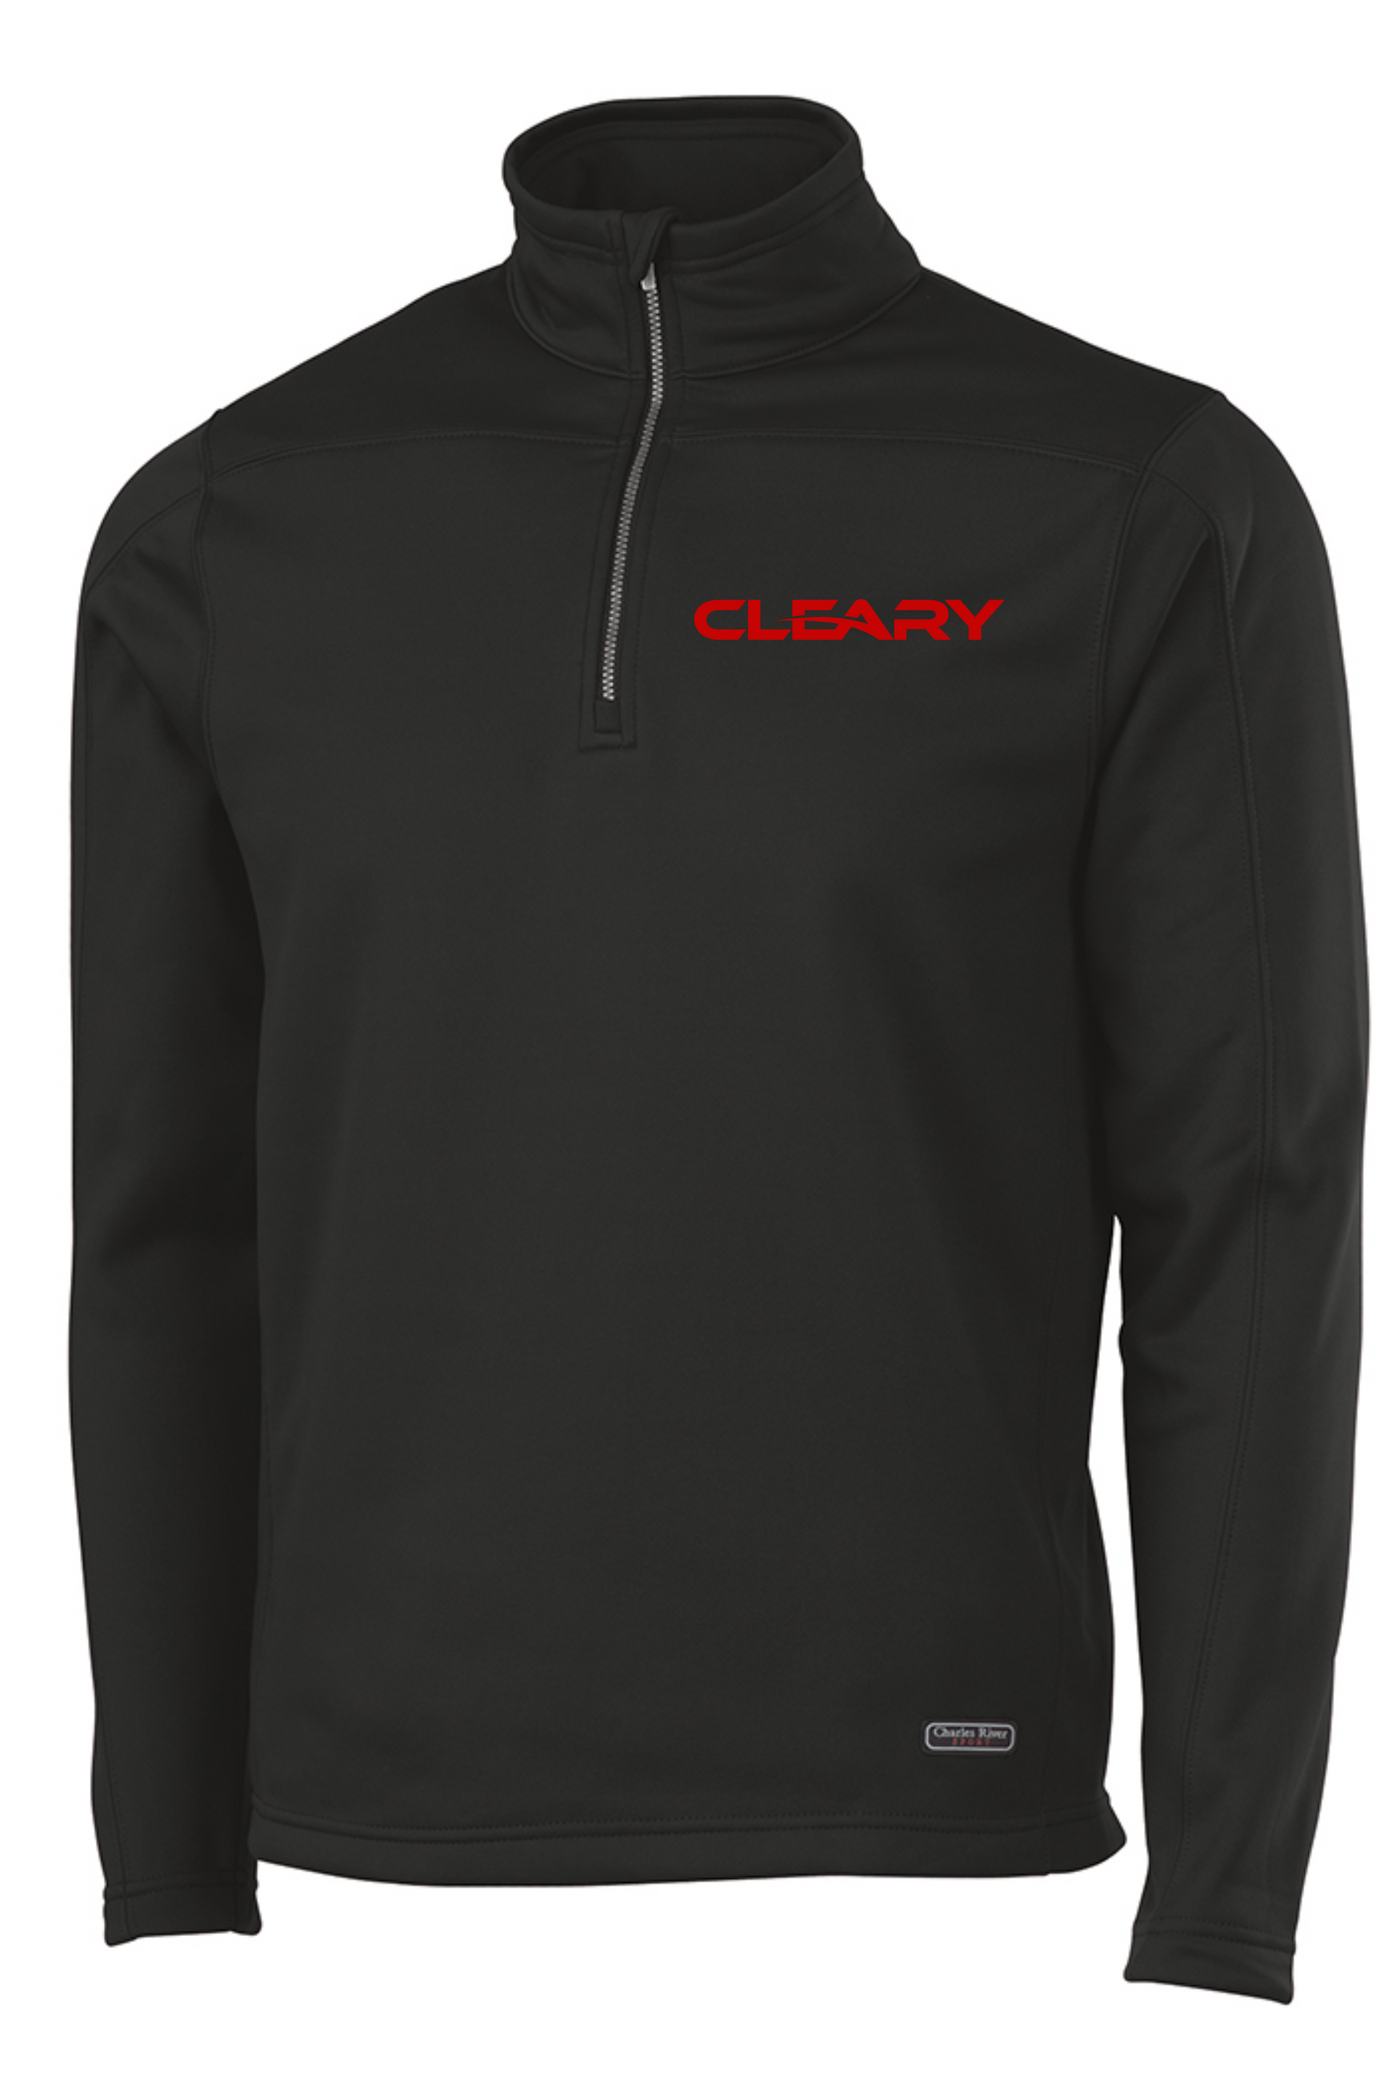 Cleary's Stealth Zip Pullover Black